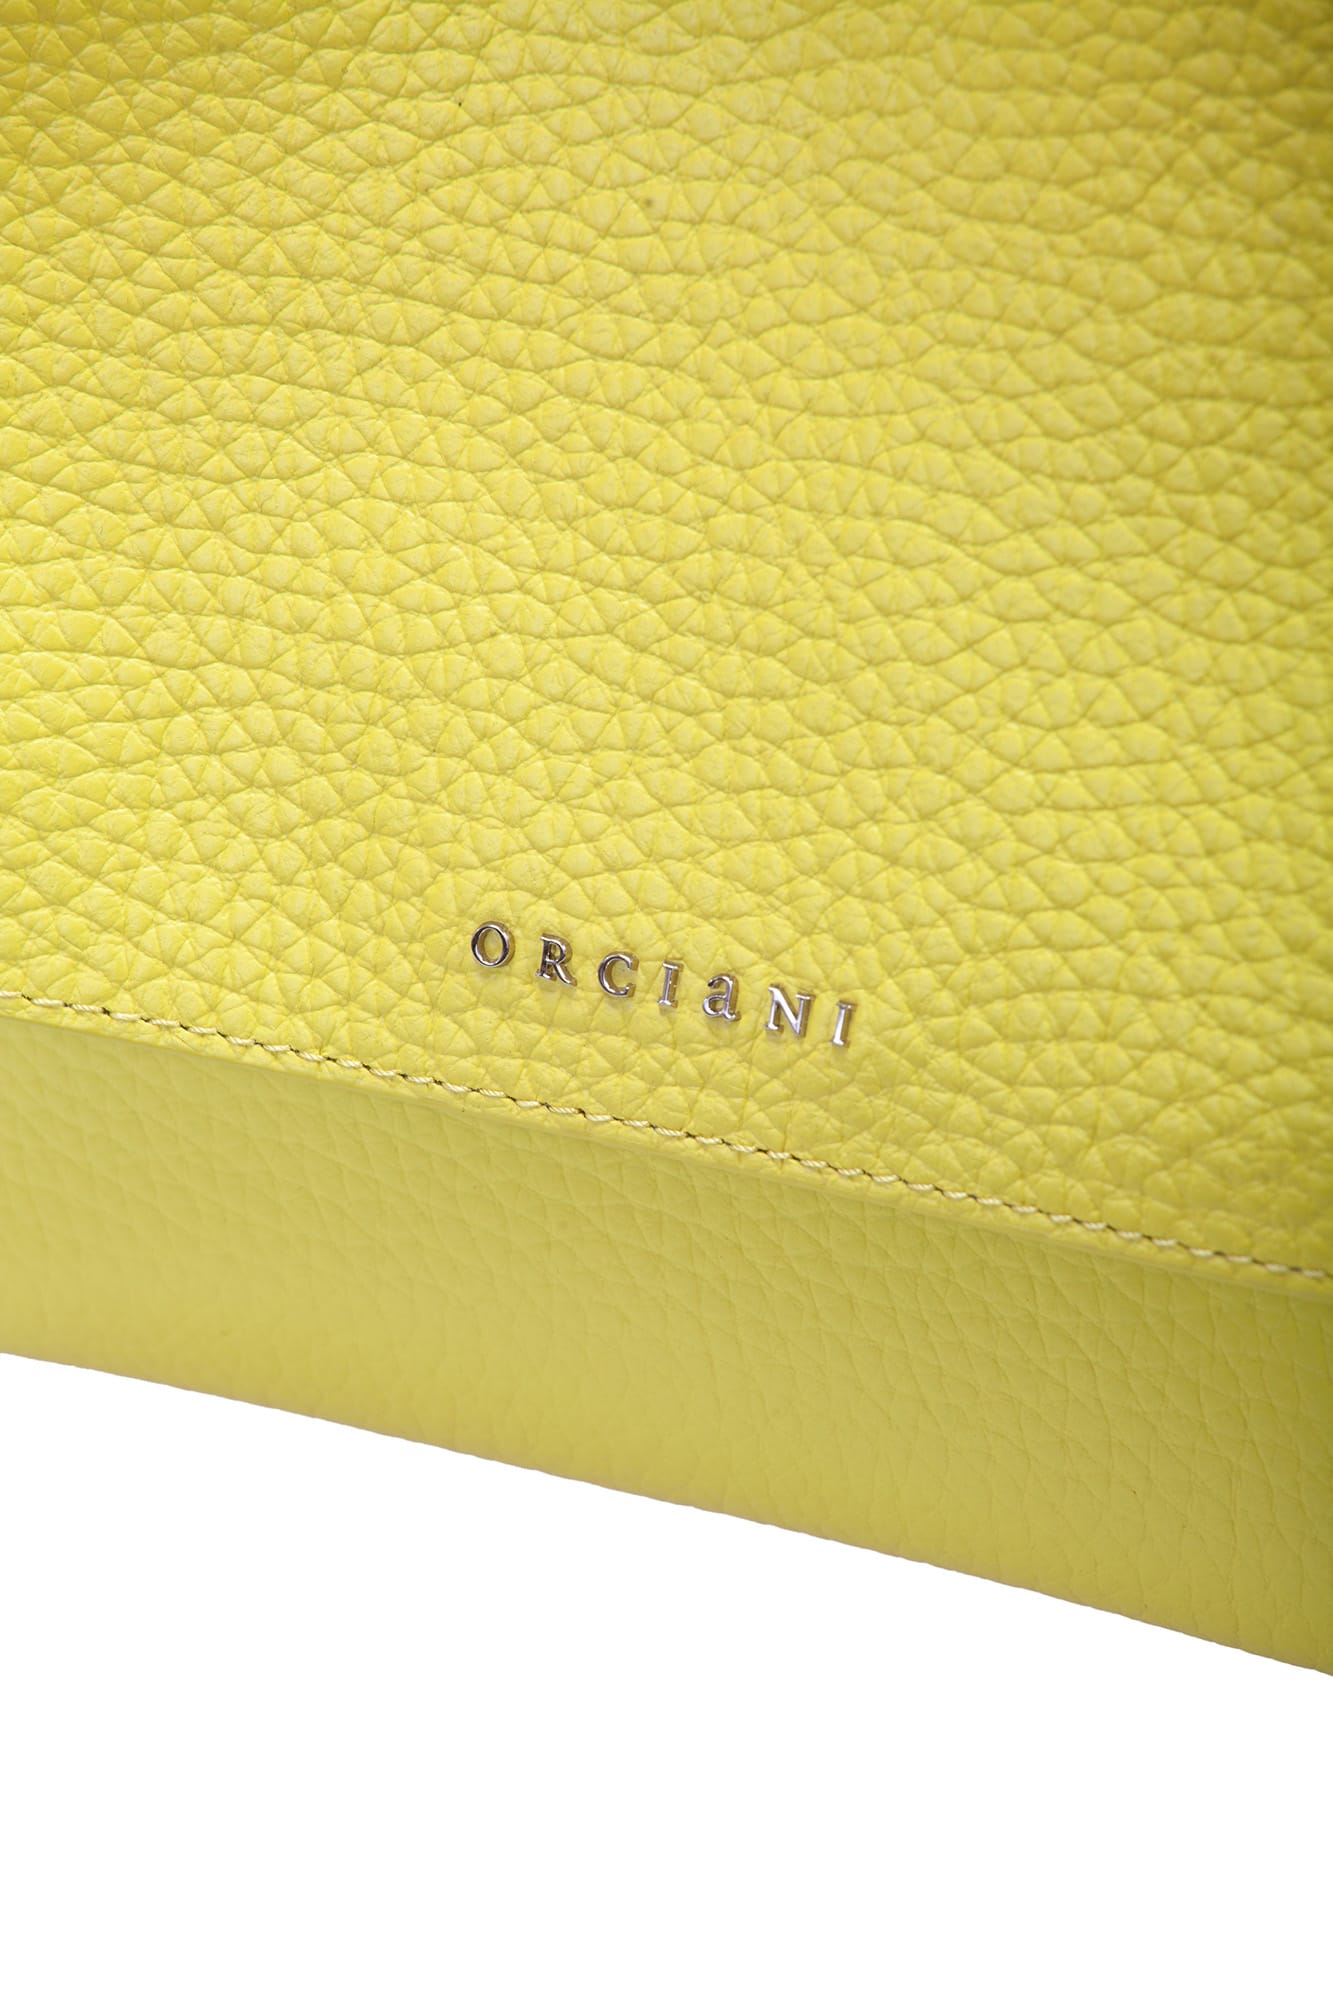 Shop Orciani Bags.. In Acido